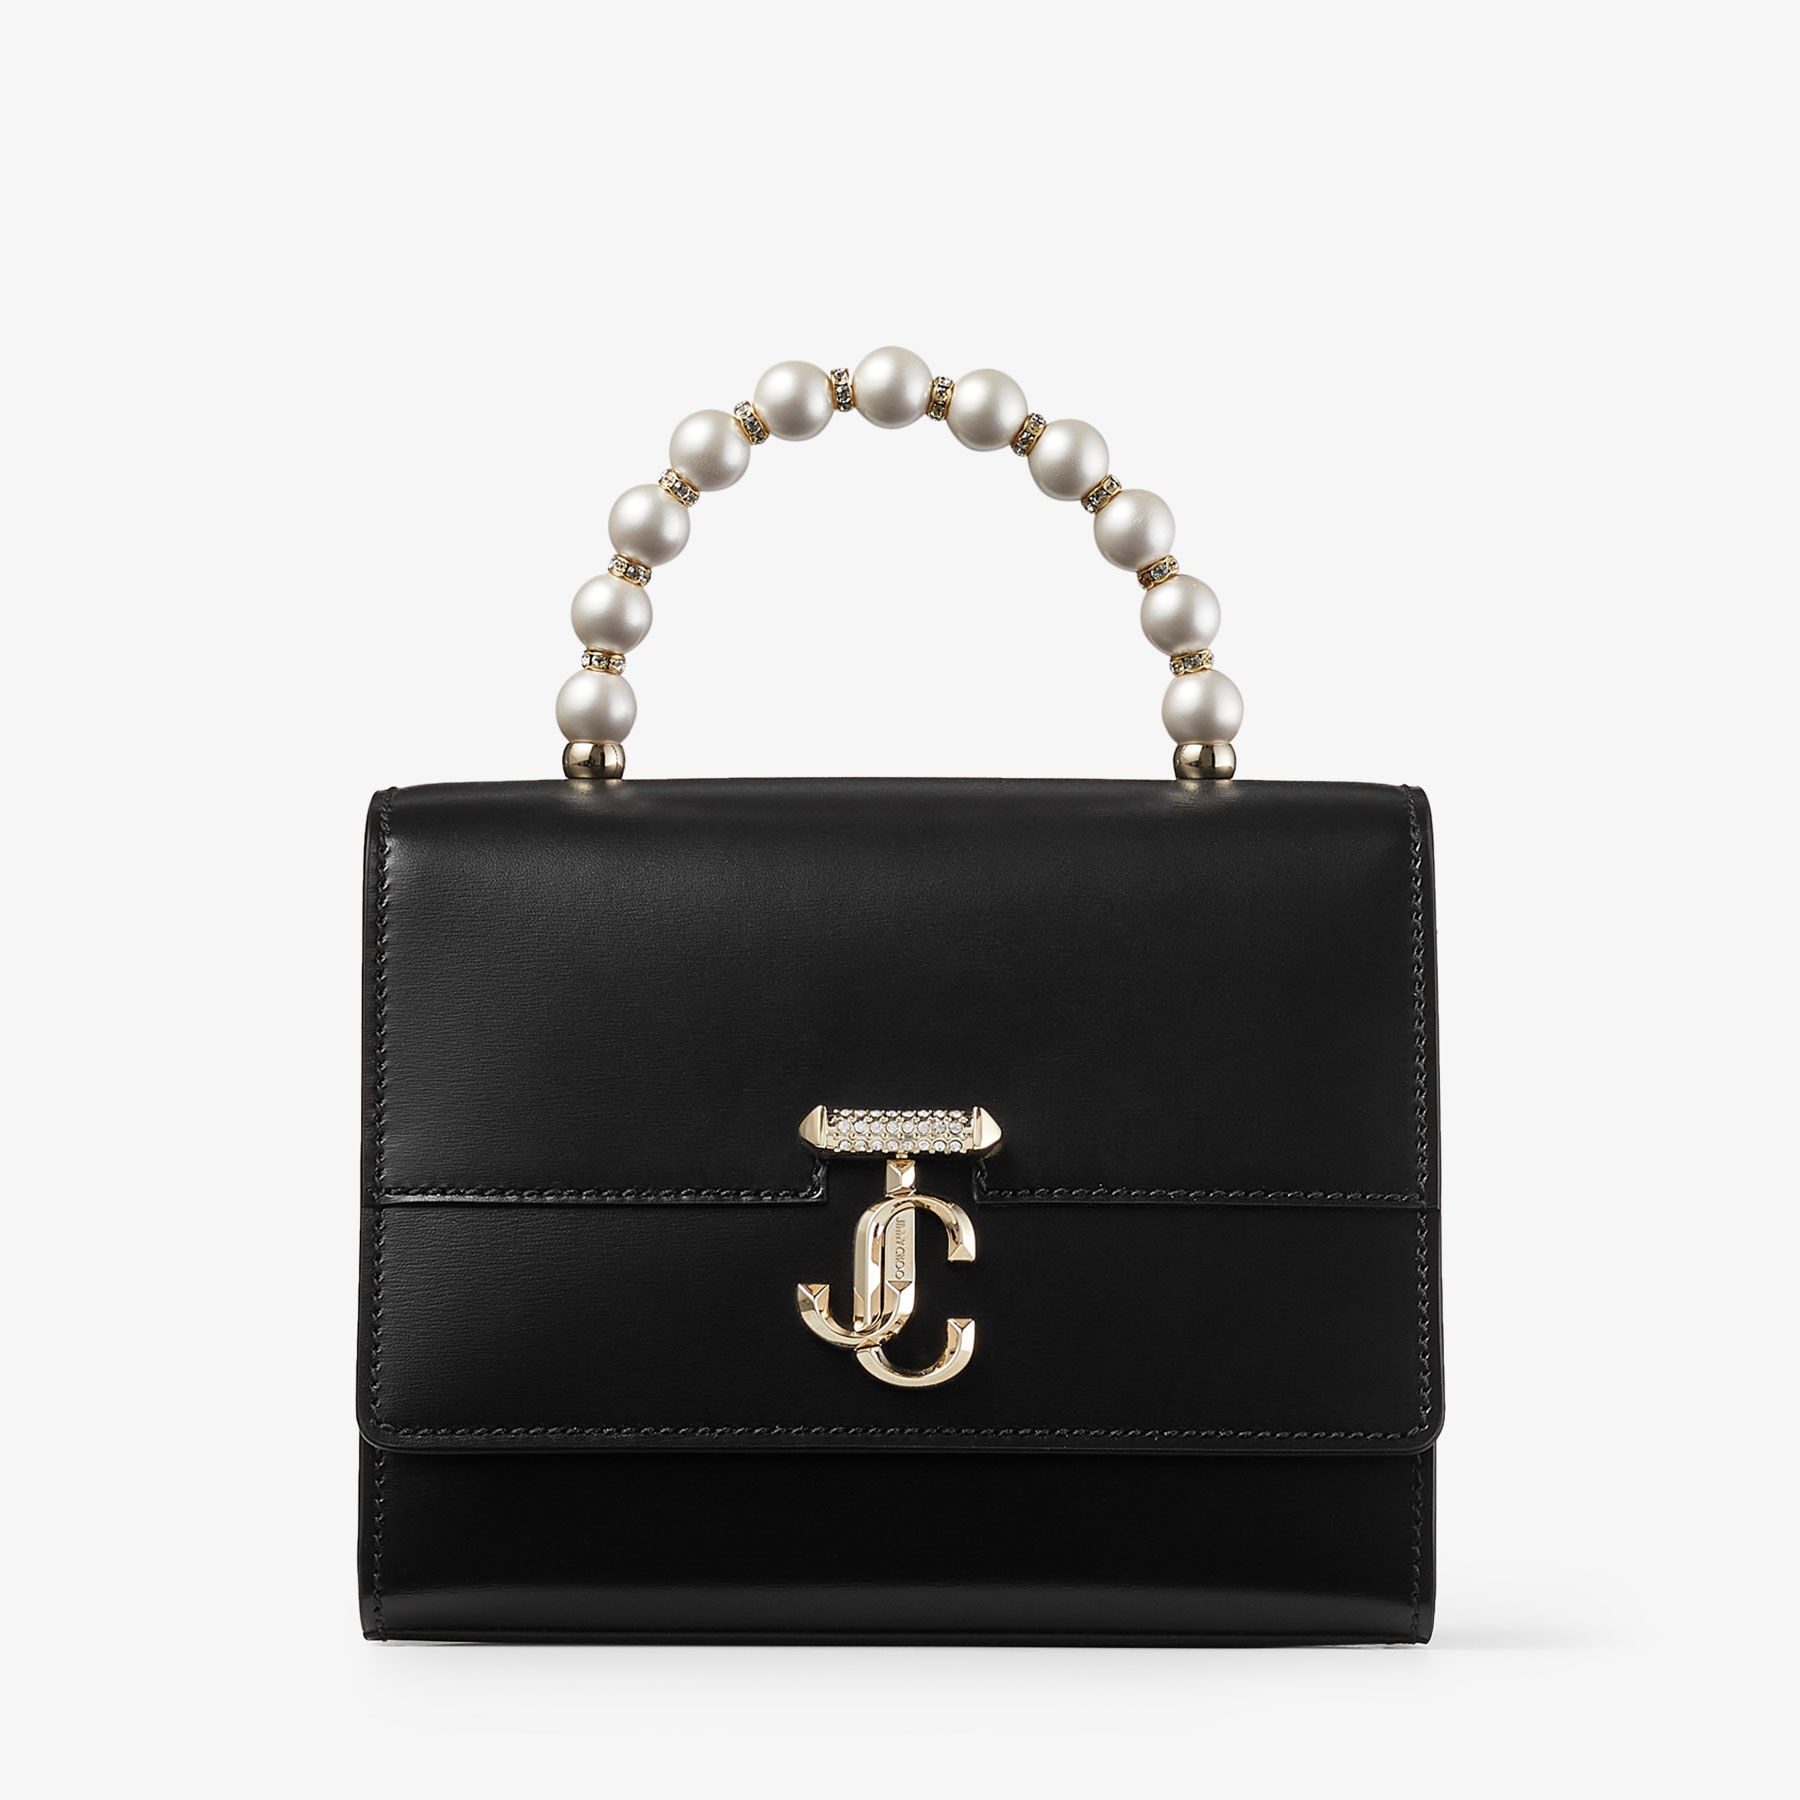 Avenue Top Handle/S
Black Box Leather Top Handle Bag with Pearls - 1